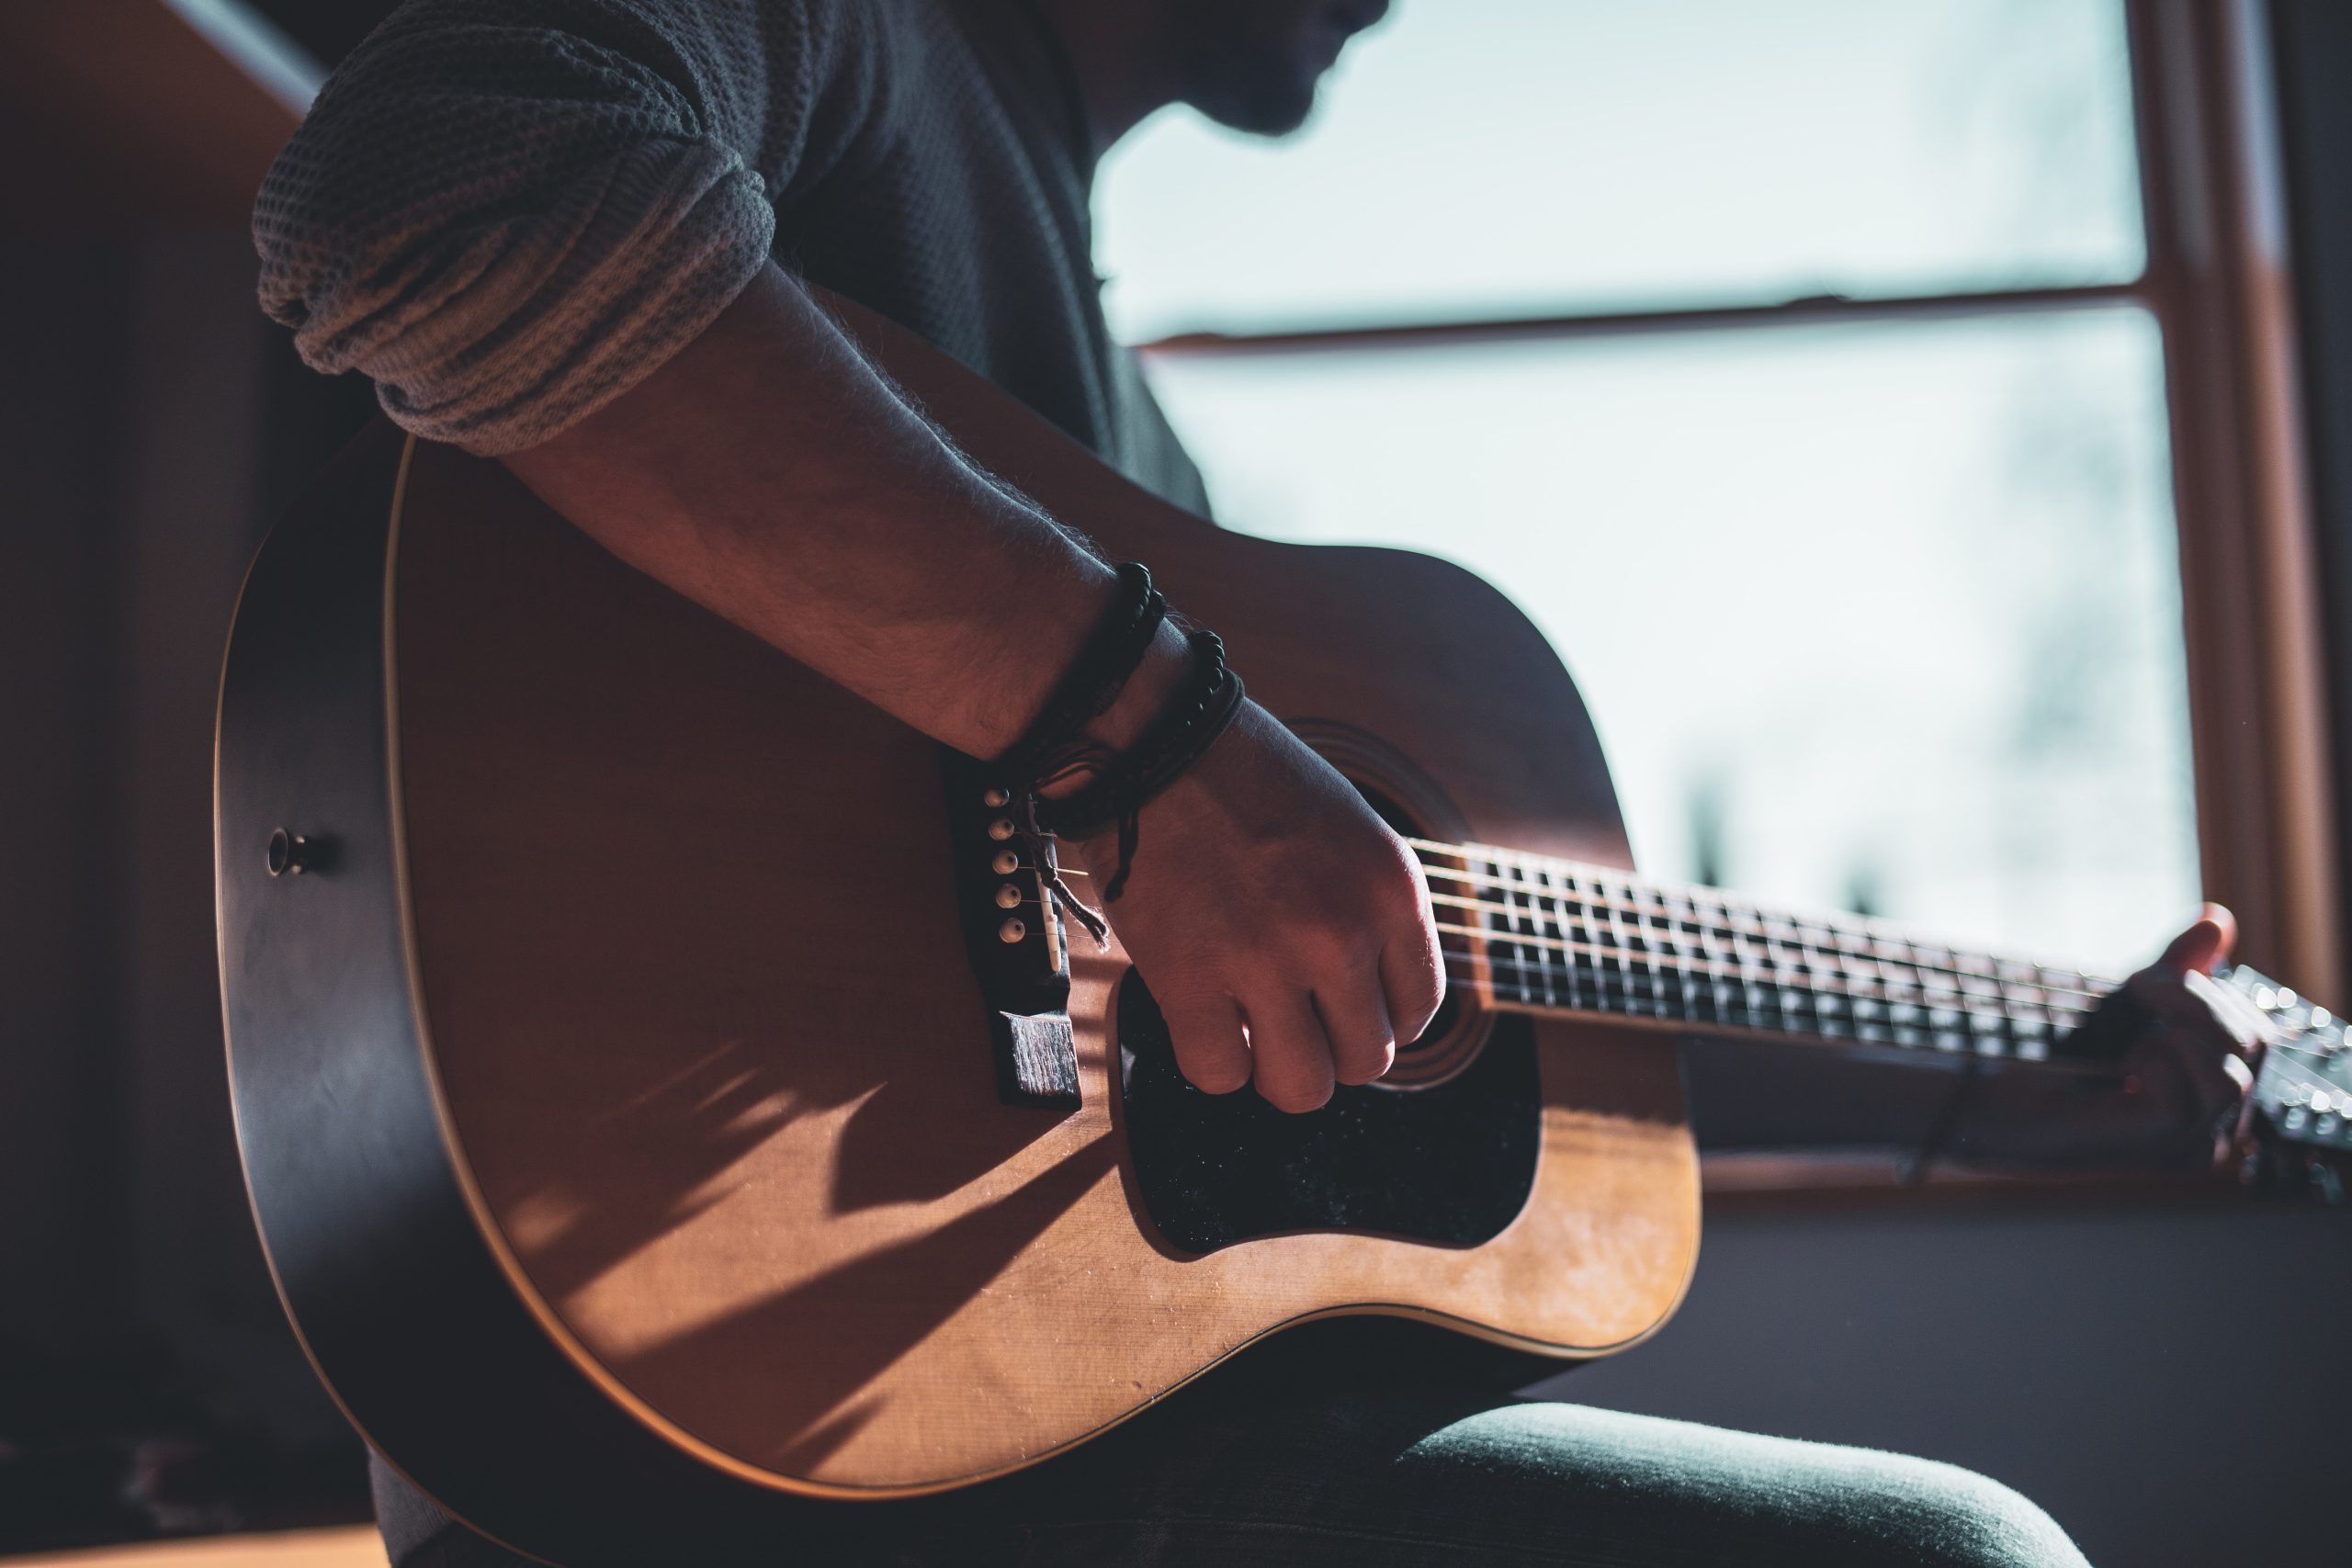 What You Should Know Before Learning How to Play Guitar